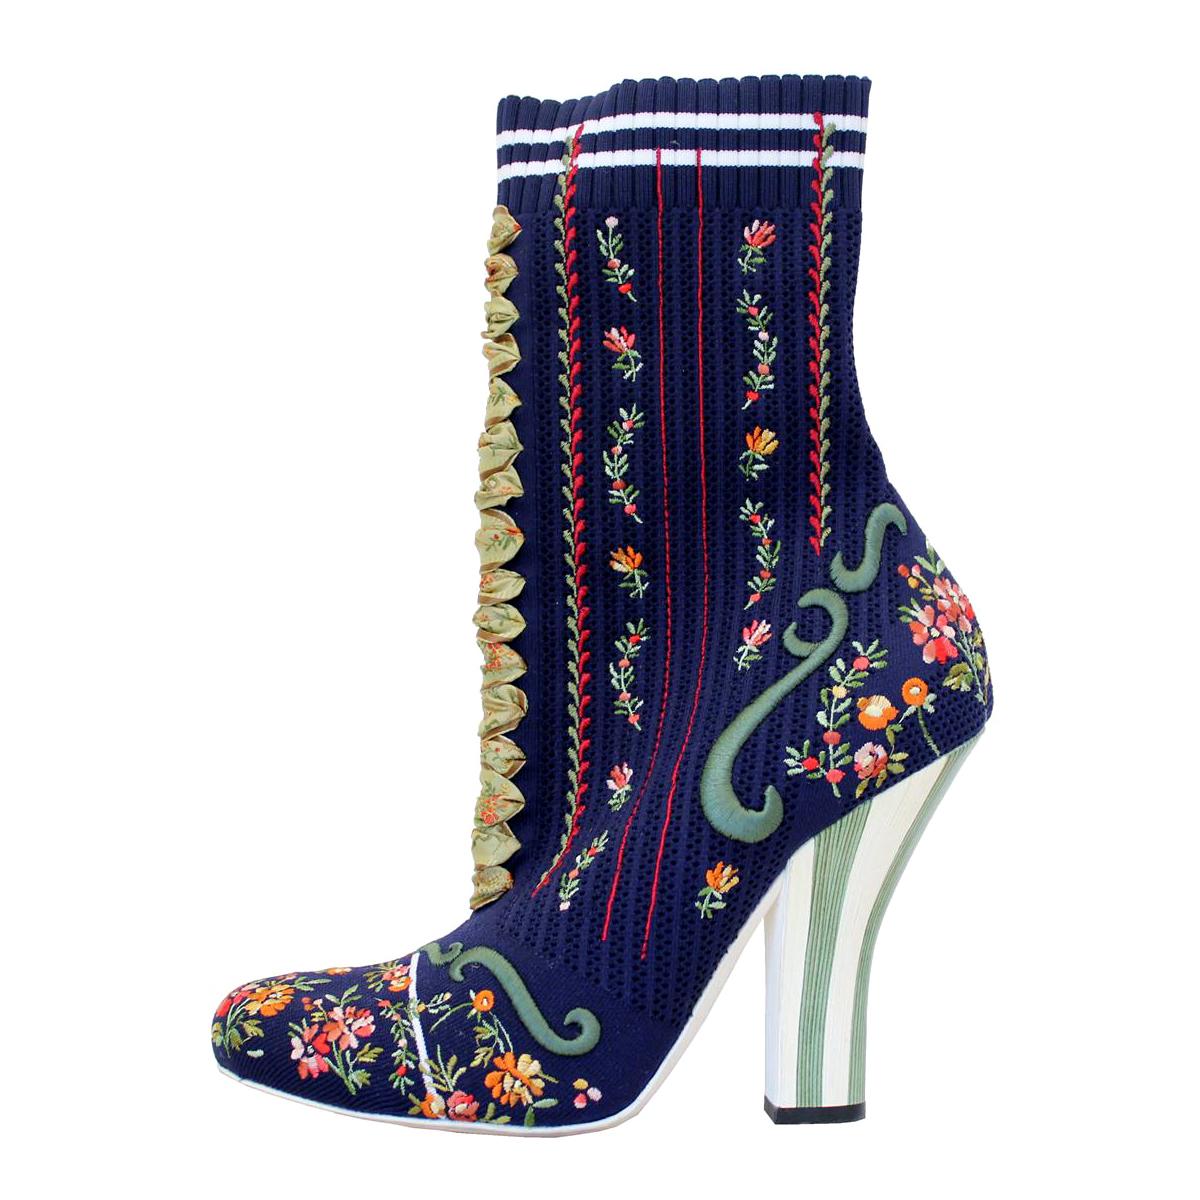 Fendi Embroidered Sock Ankle Boots 40